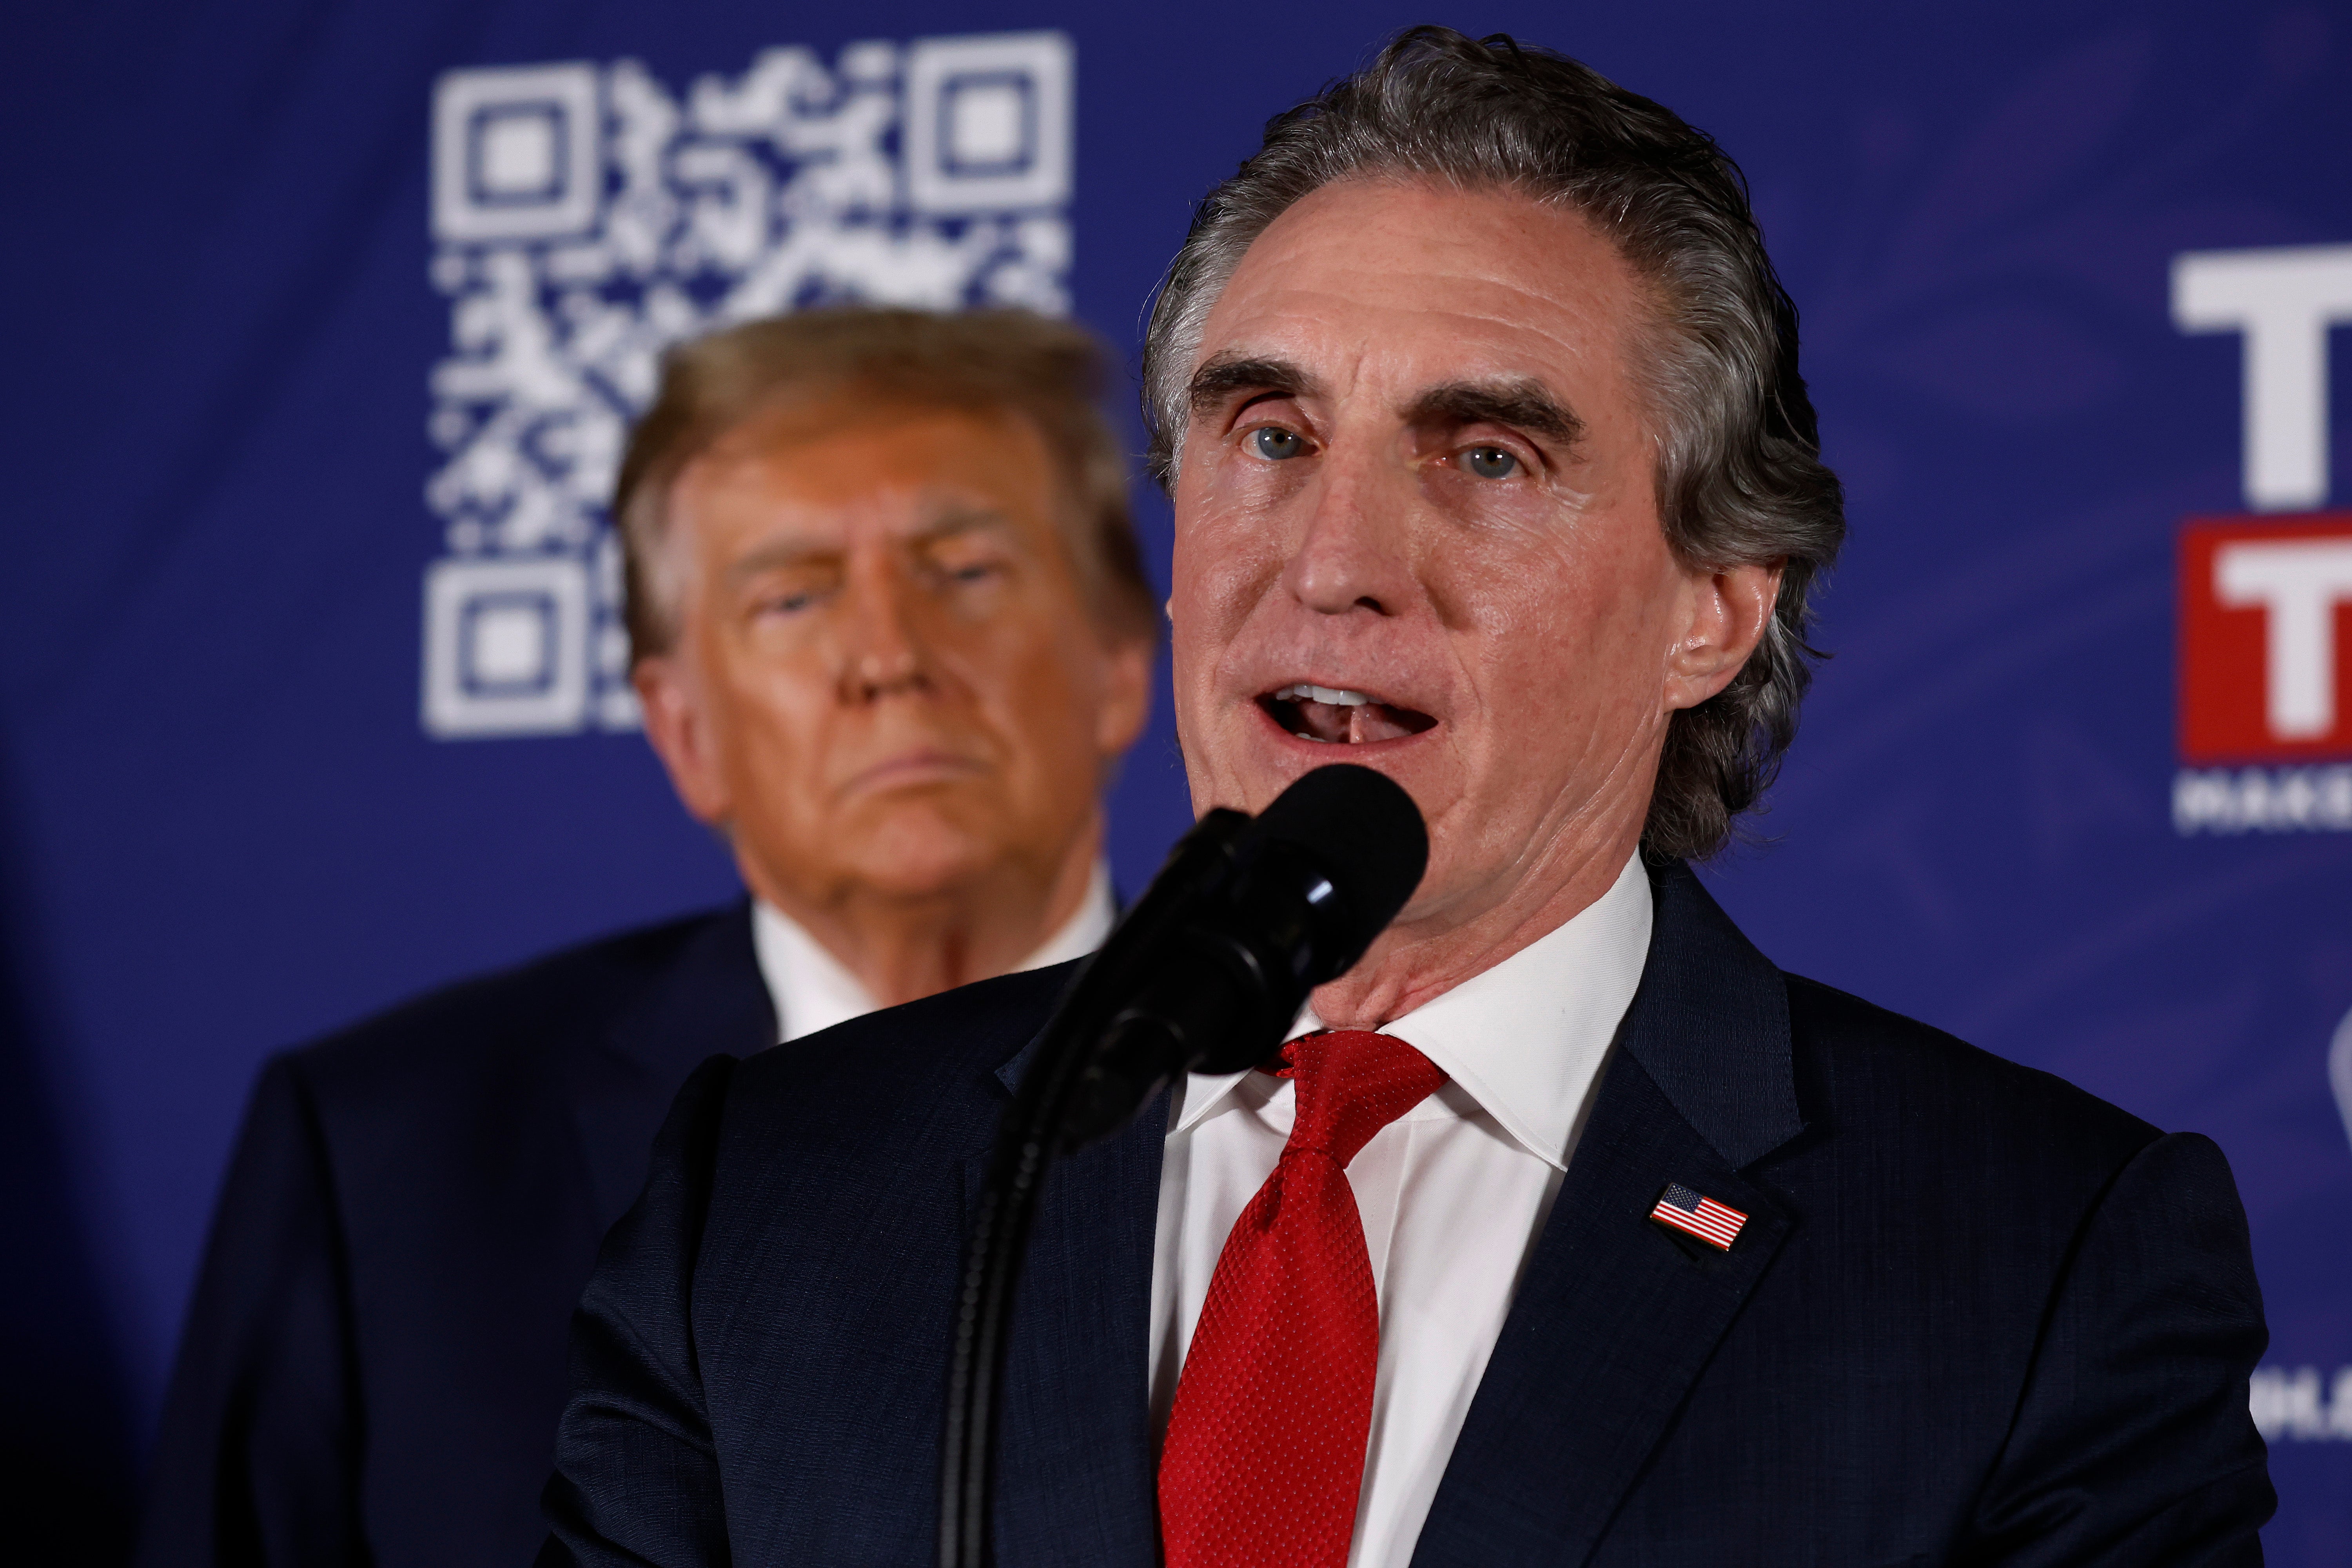 North Dakota Governor Doug Burgum encourages voters to support Republican presidential candidate and former President Donald Trump during a campaign rally in the basement ballroom of The Margate Resort on January 22, 2024 in Laconia, New Hampshire.